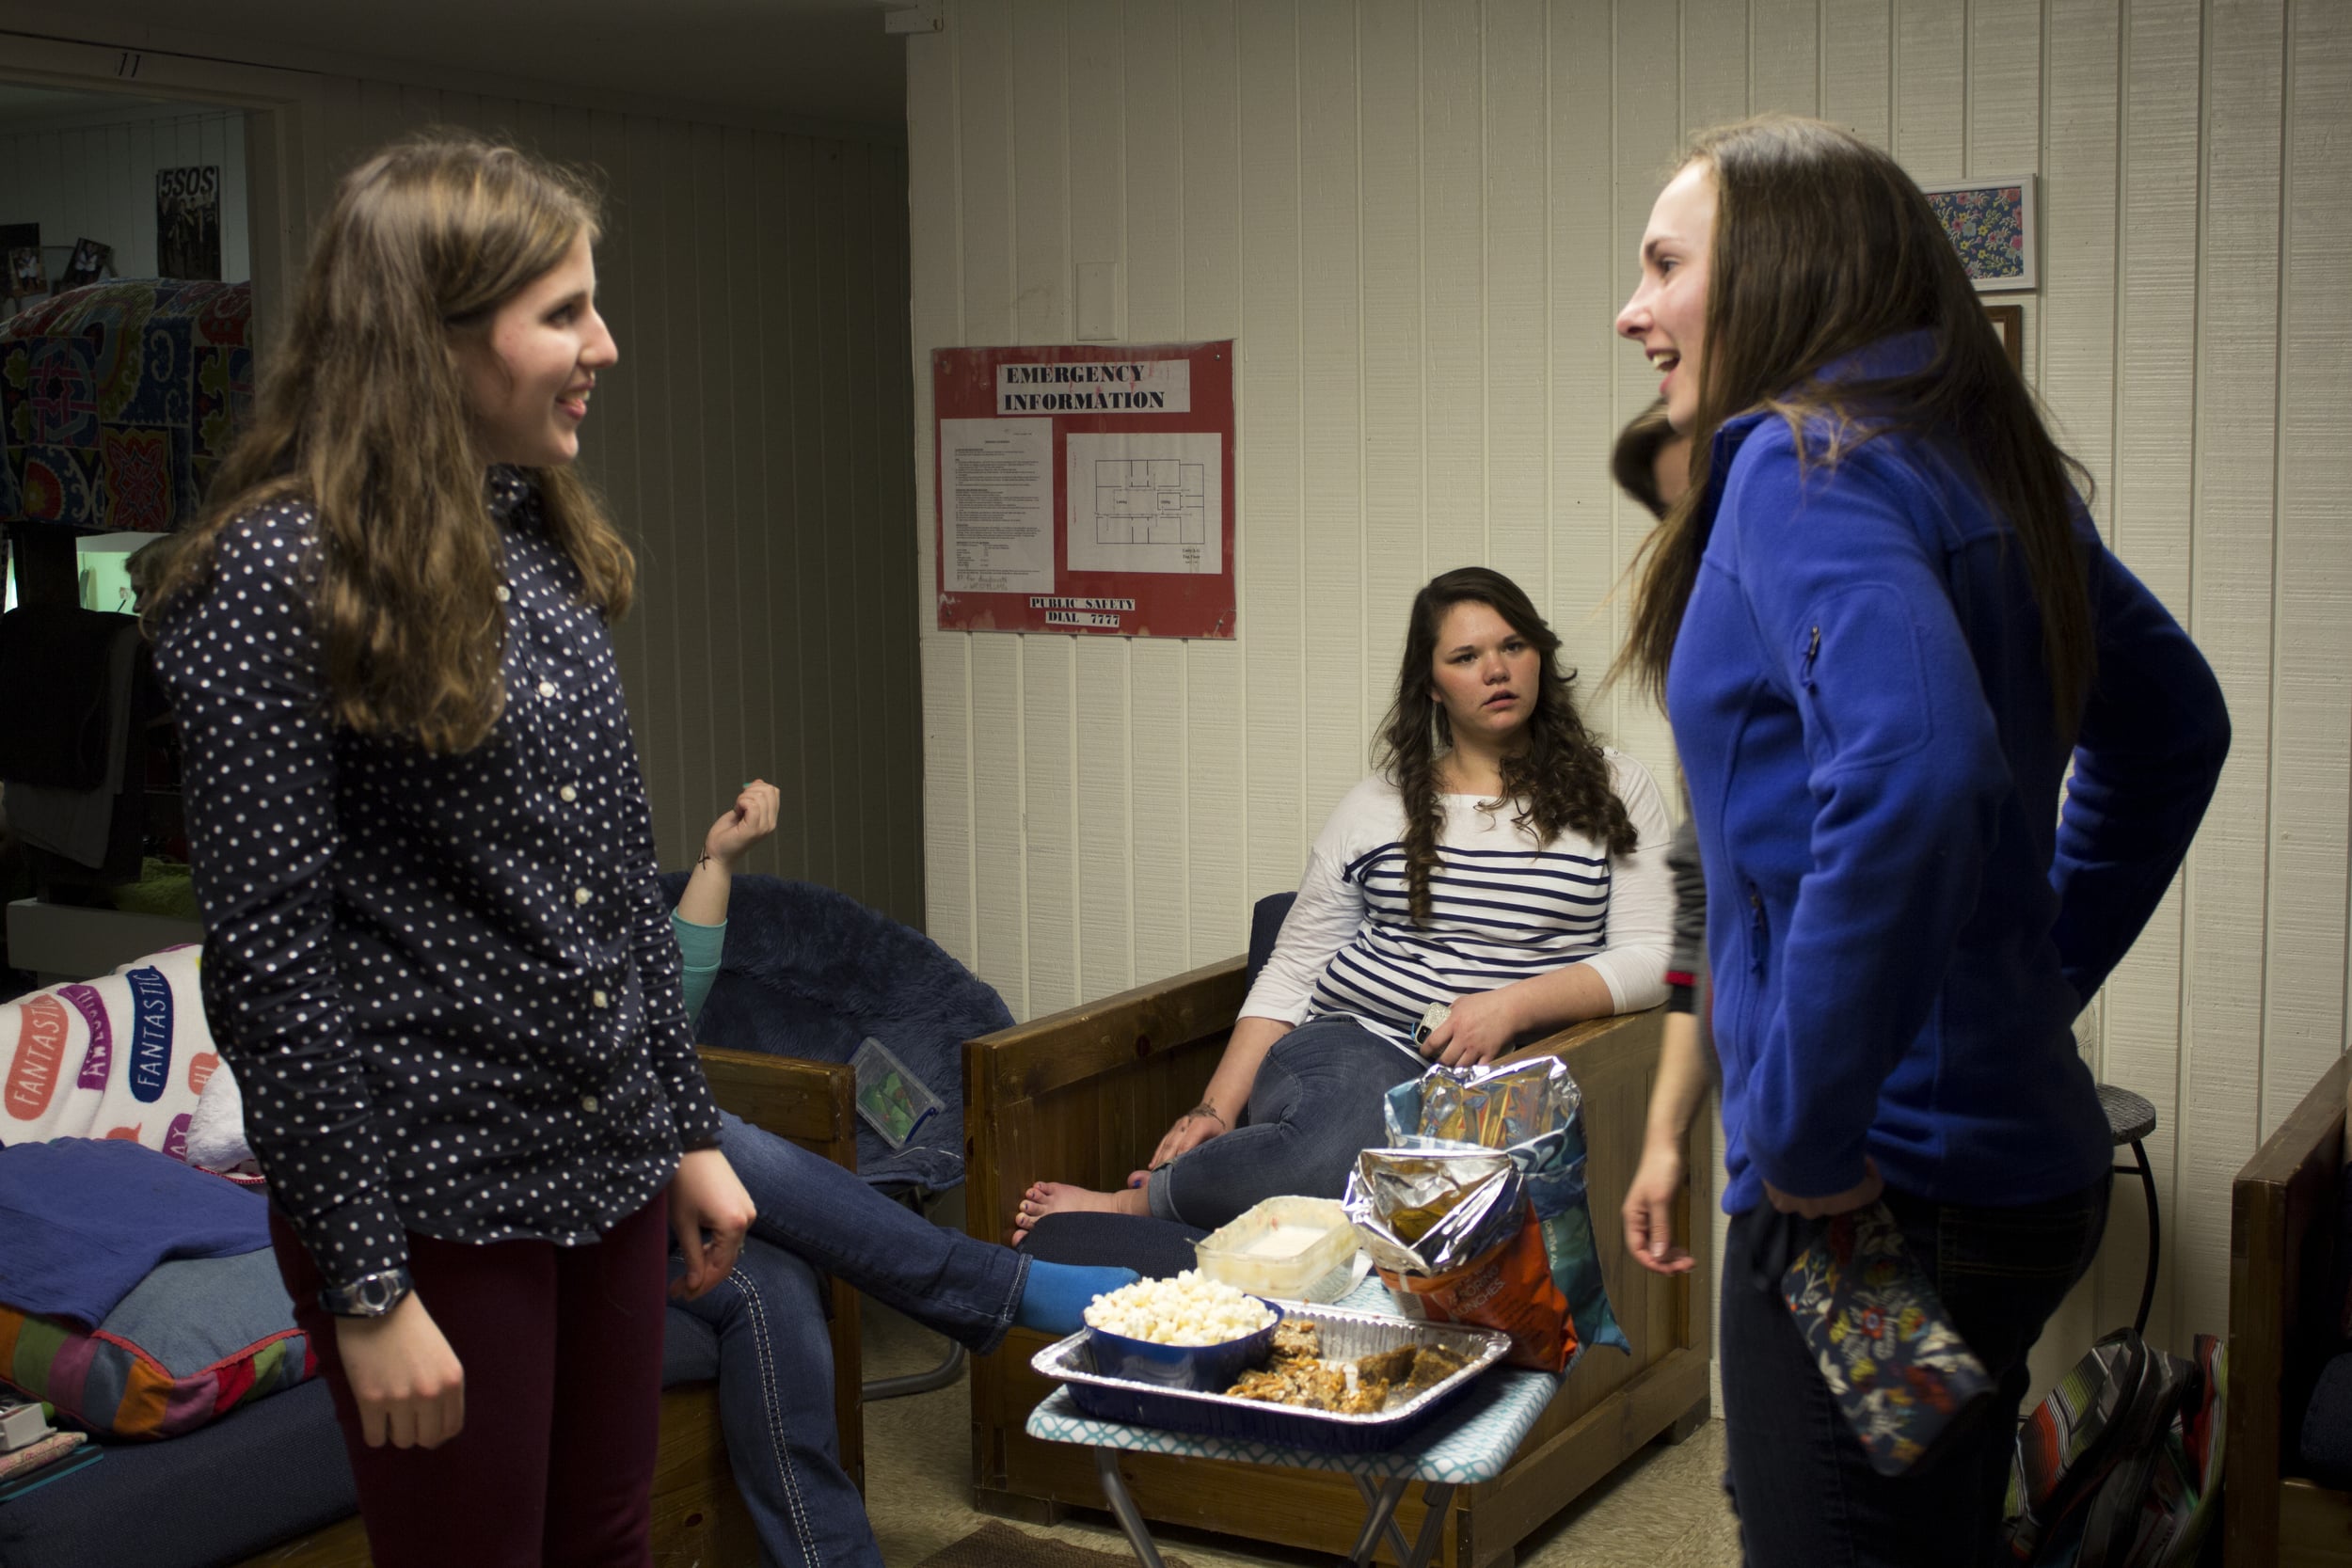  Often during open dorms, girls enjoy preparing food to eat, always making the party that much more fun. Sophomore Meg Darby chats with junior Rachel Alley around the chips and sweets table in the middle of the common room.&nbsp; 